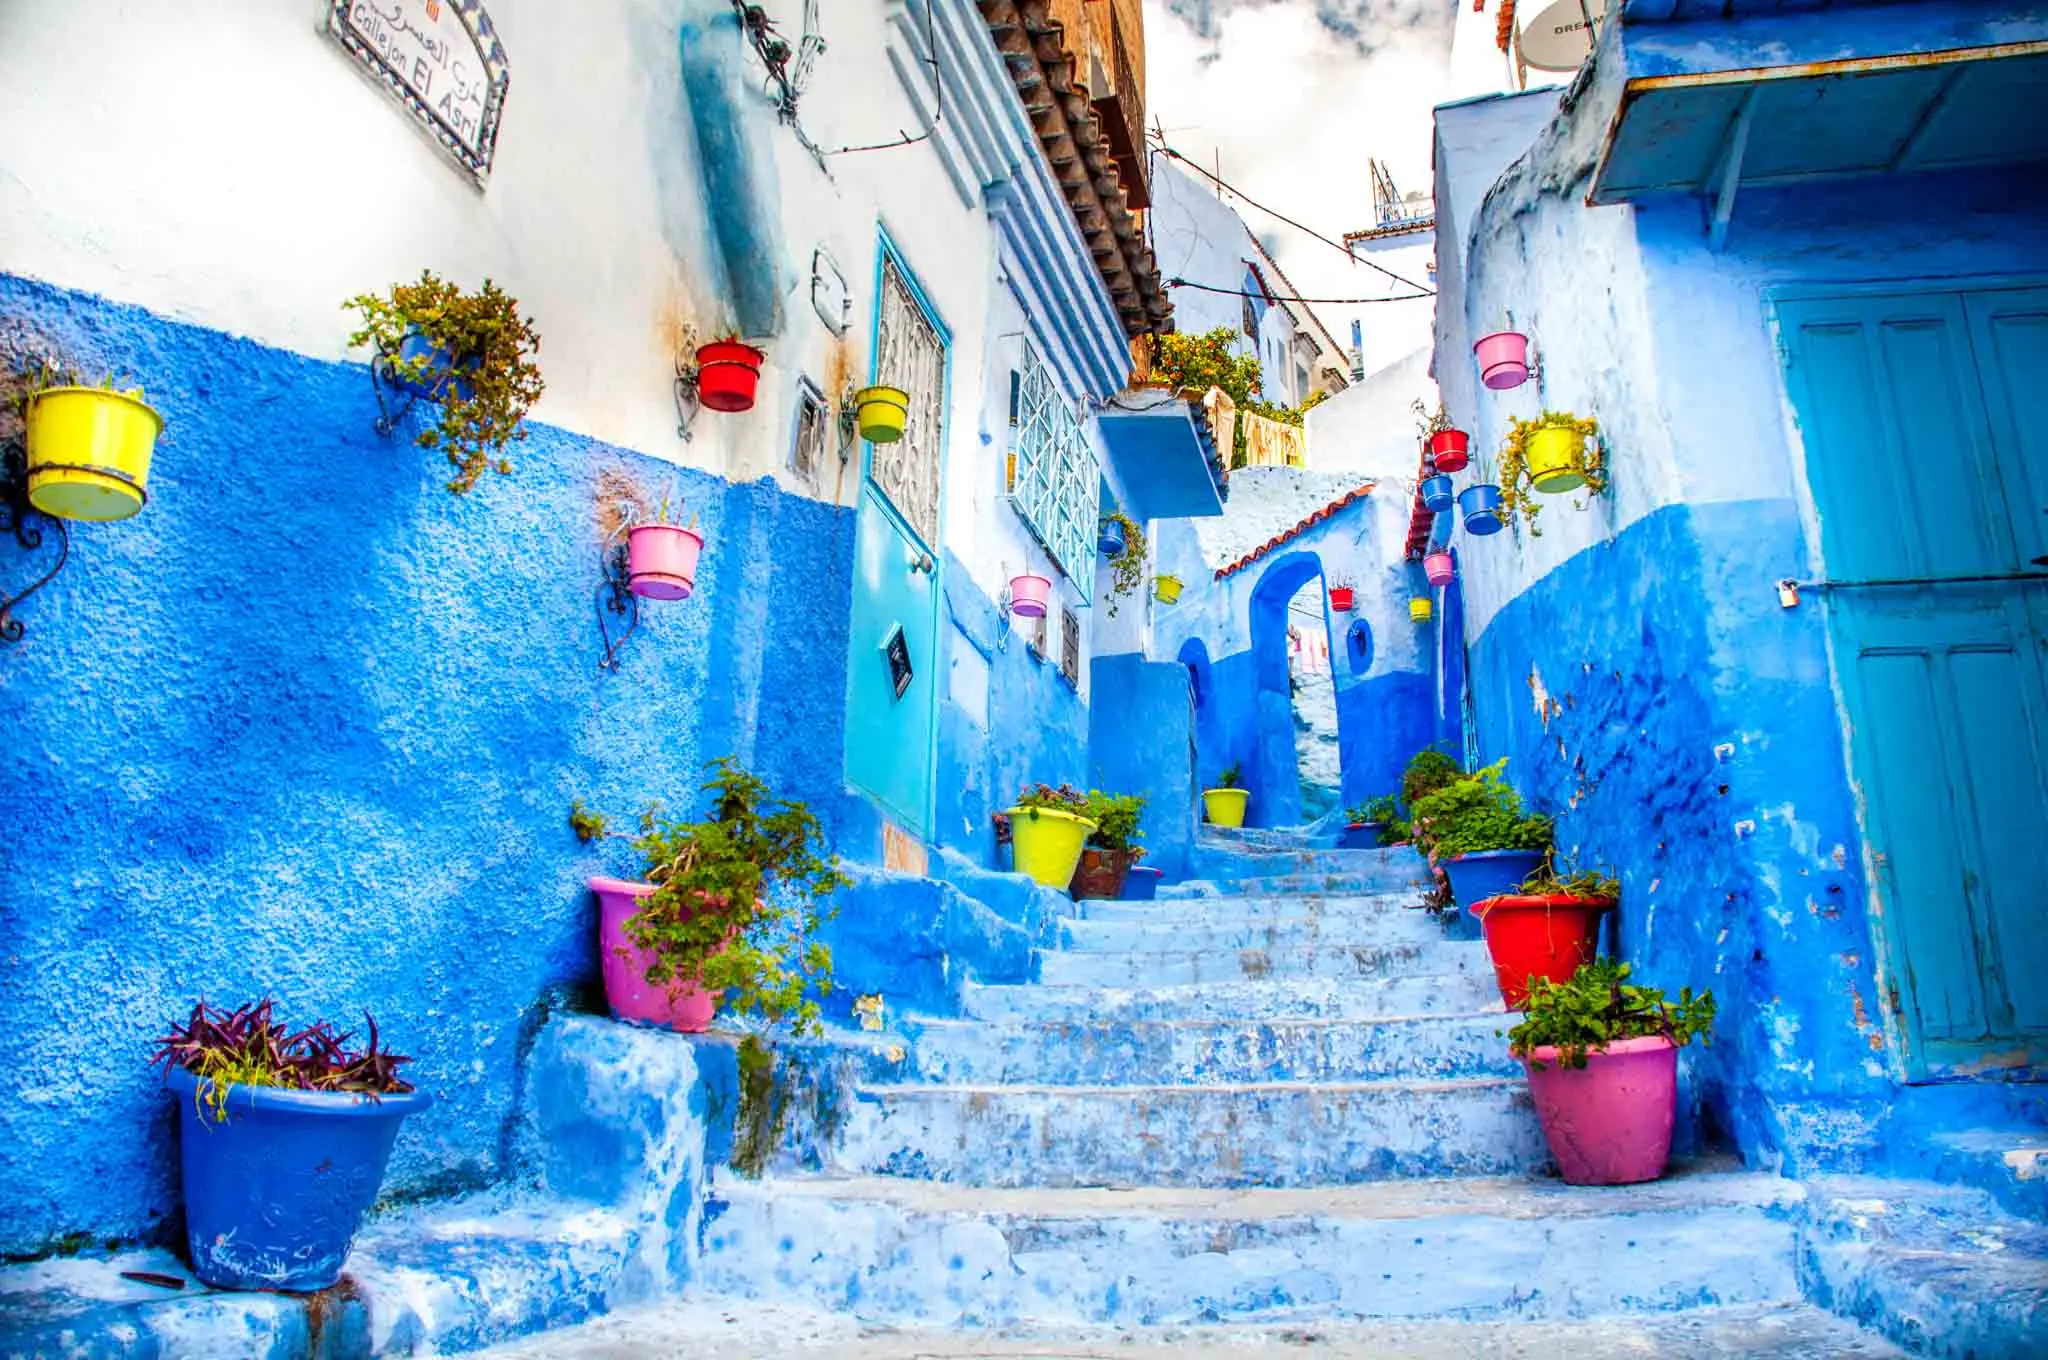 Blue staircase lined with colorful pots.